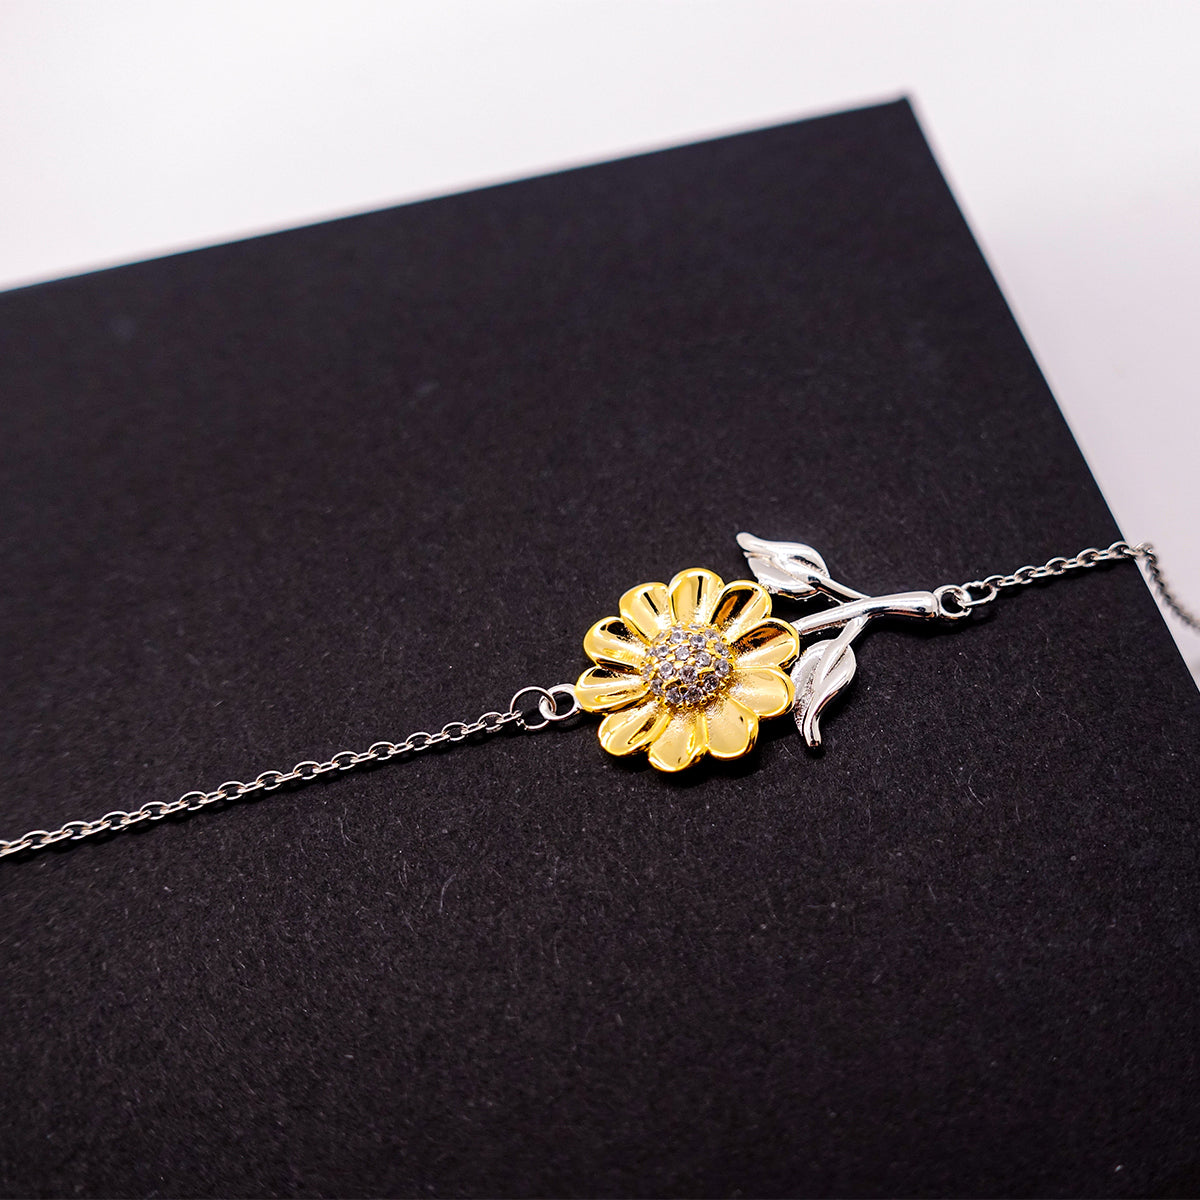 Nephew Sunflower Bracelet, Never forget that I love you forever, Inspirational Nephew Birthday Unique Gifts From Auntie